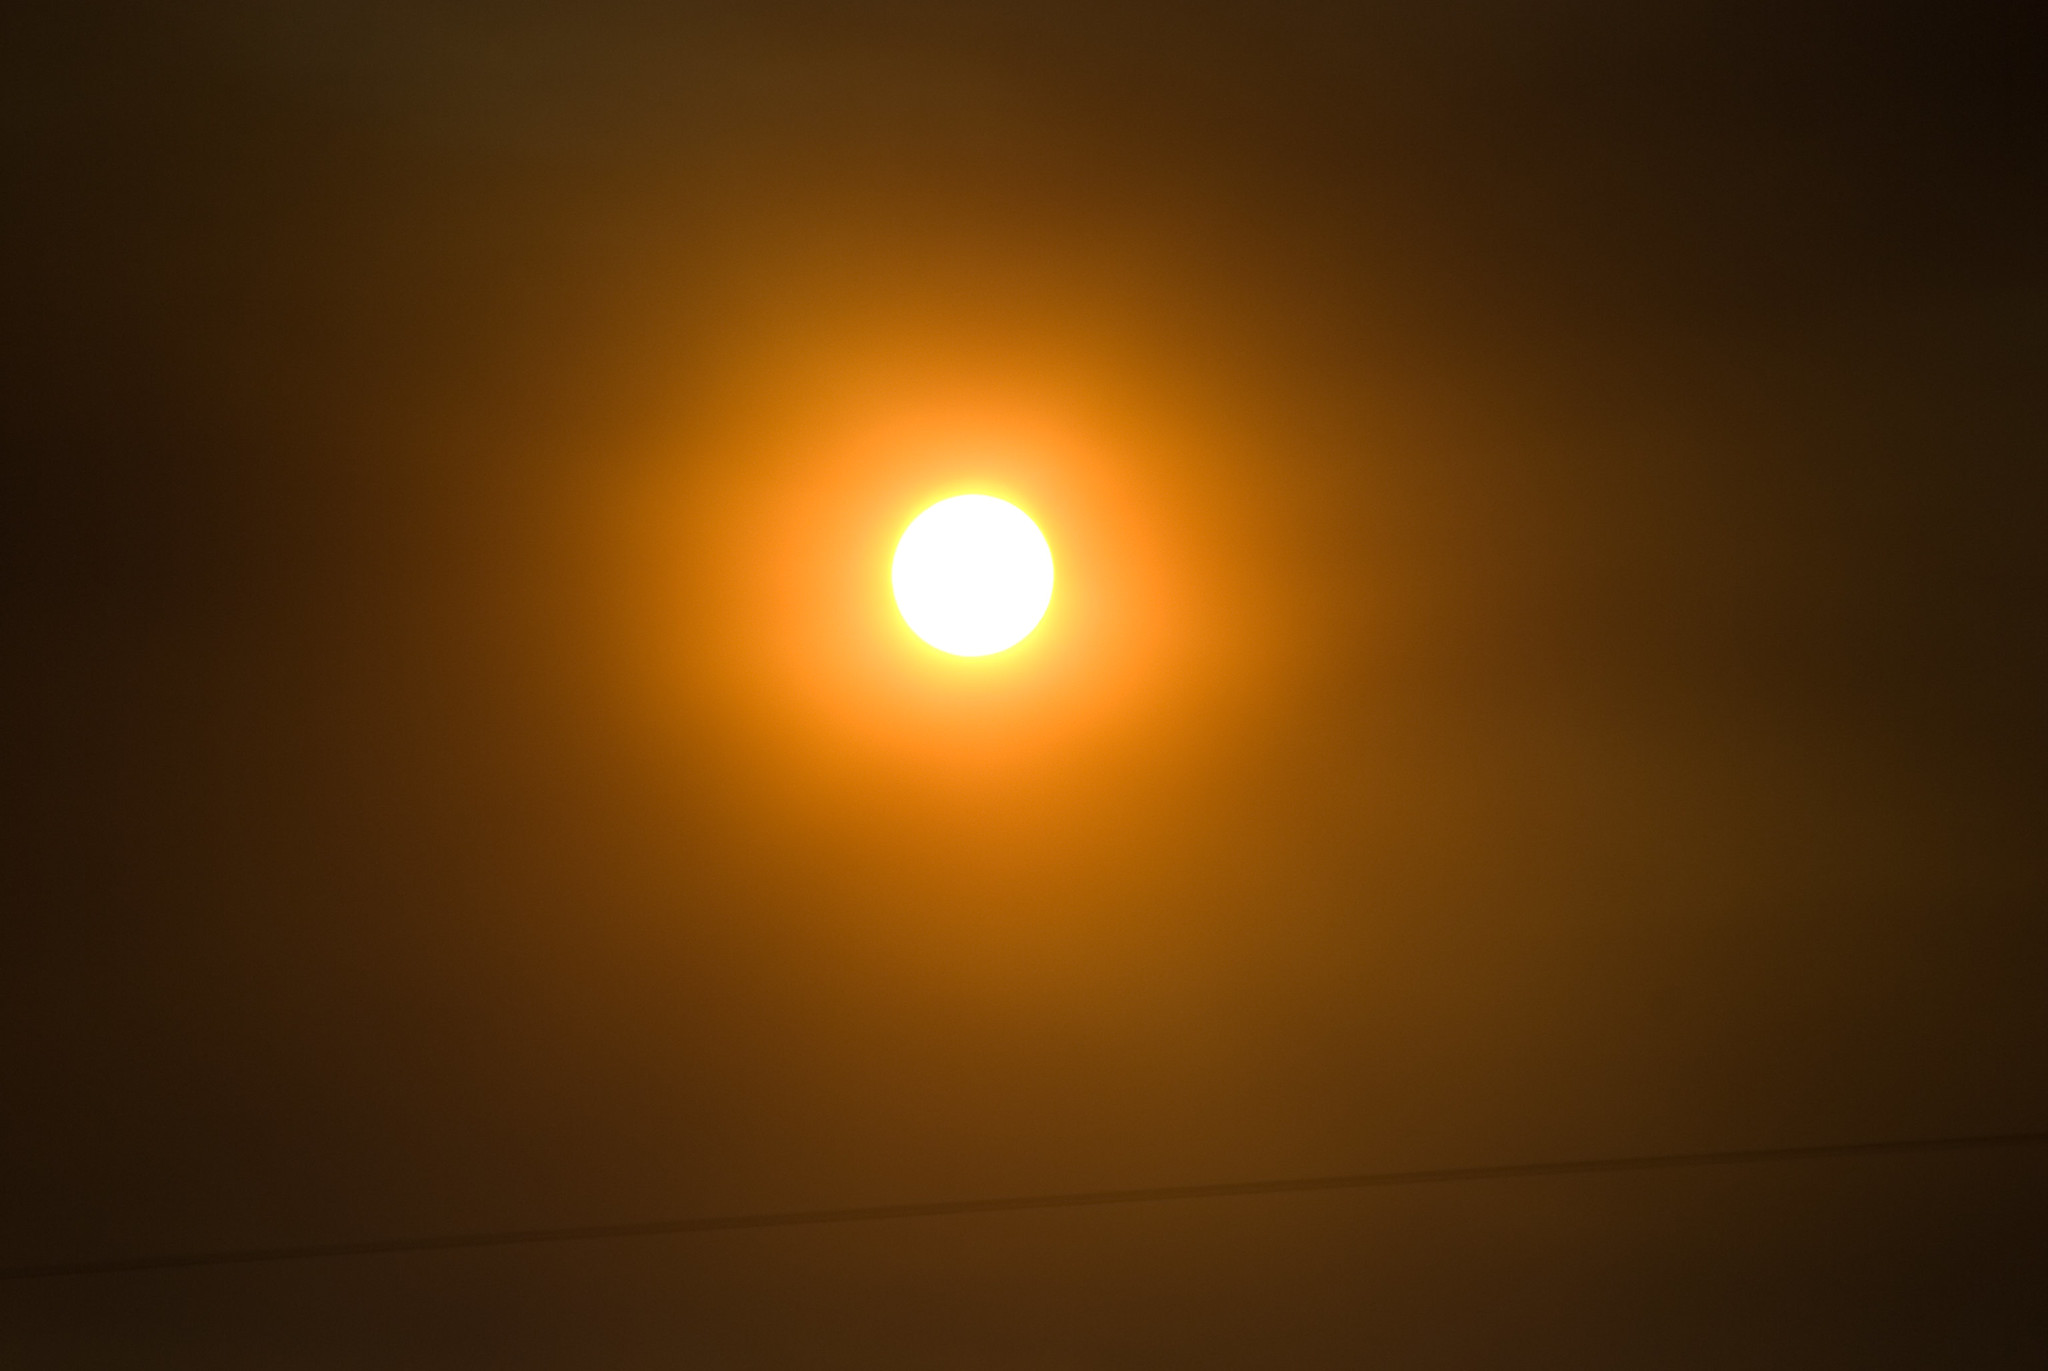 Image of the sun